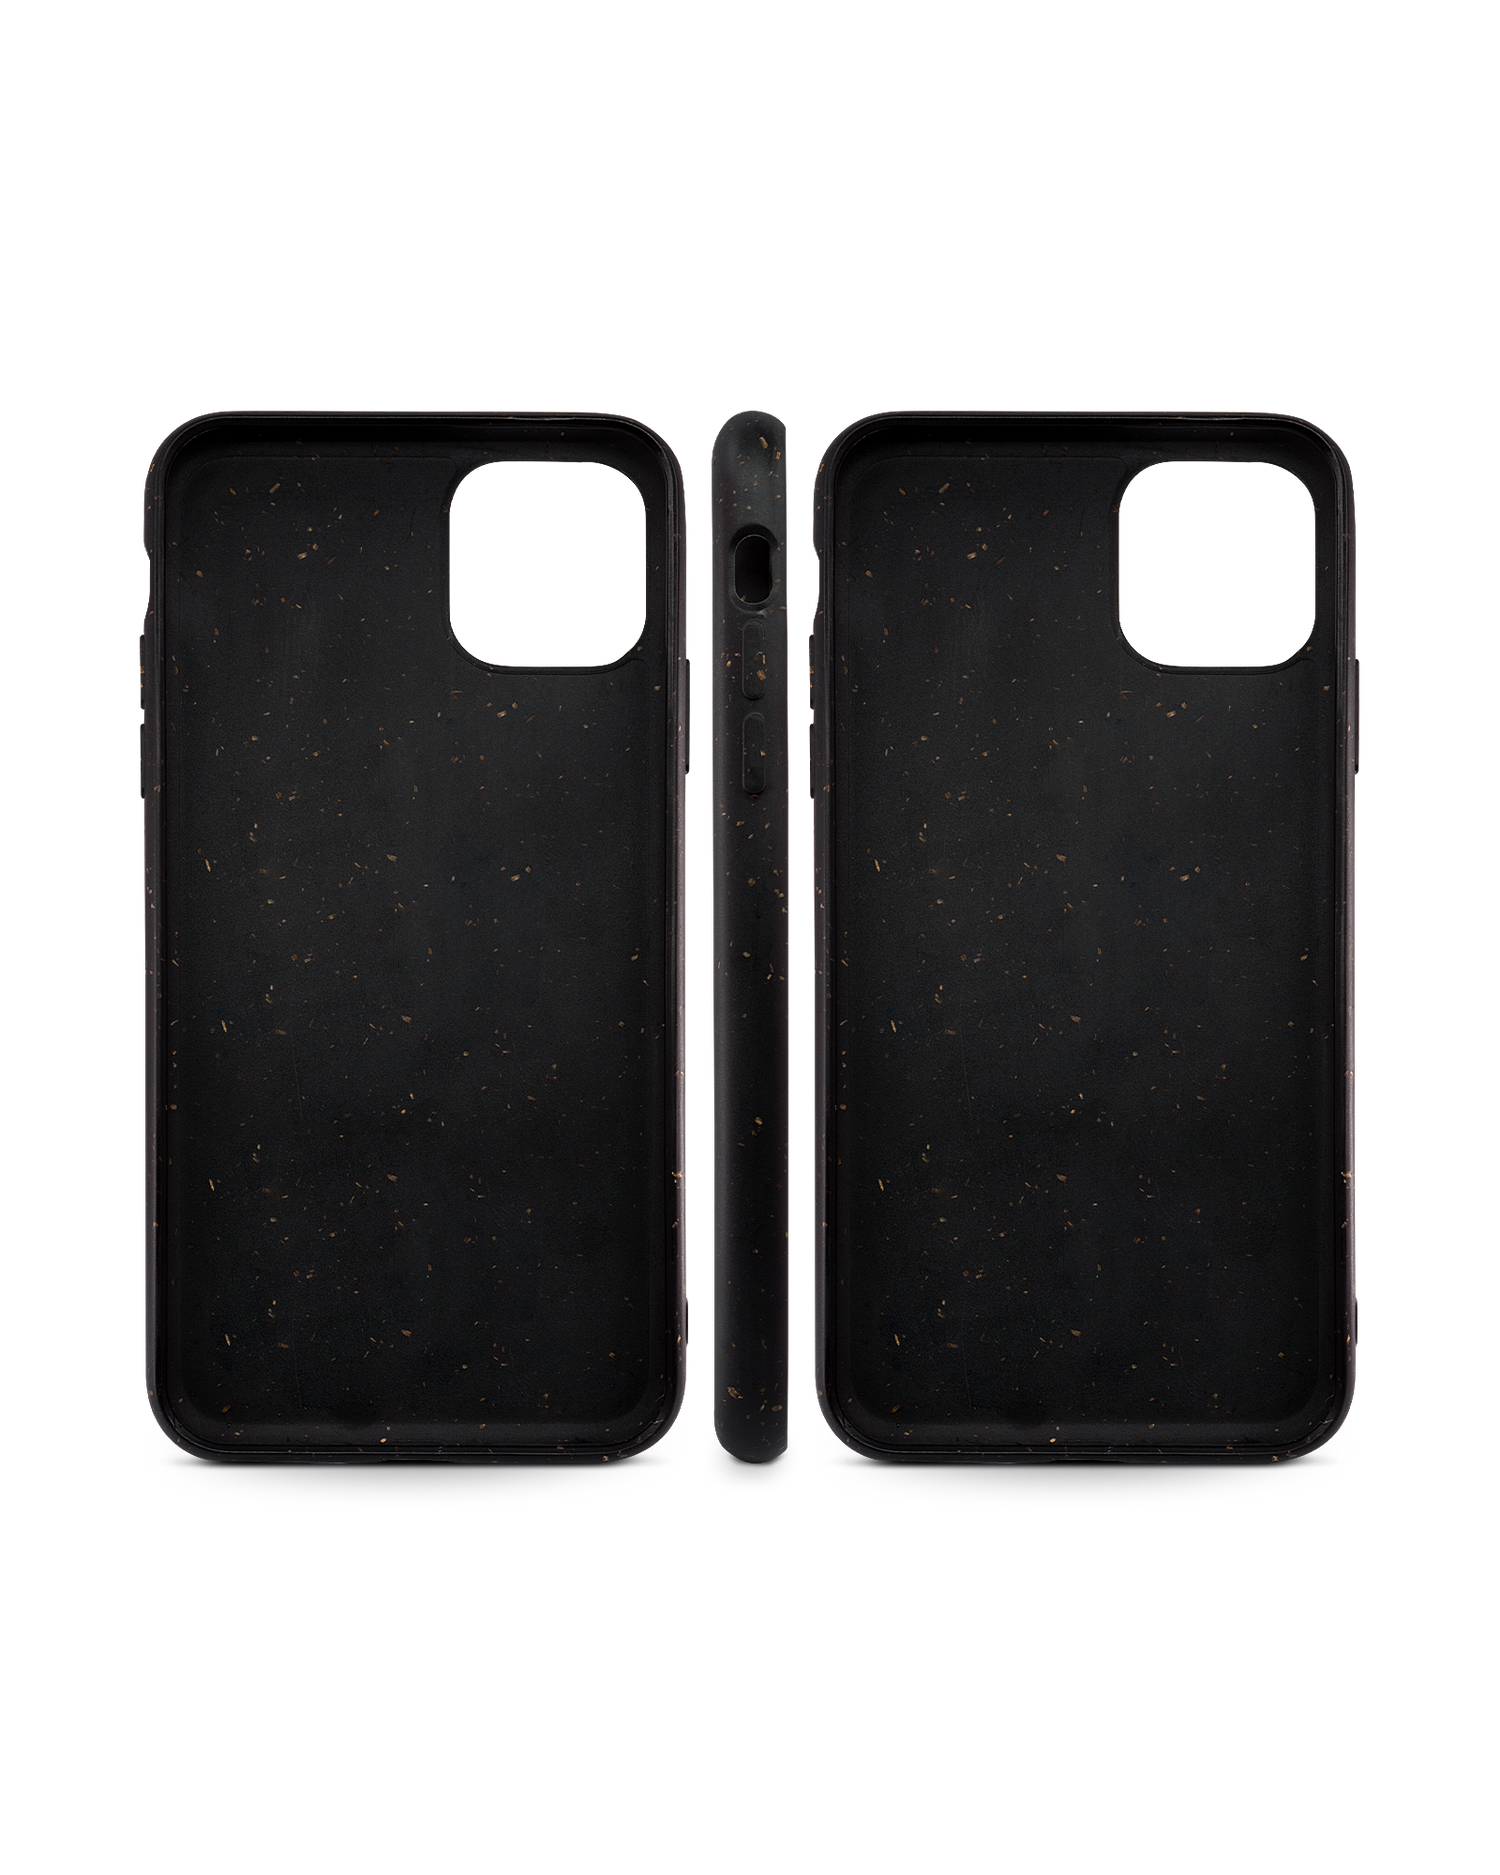 Black Eco-Friendly Phone Case for Apple iPhone 11 Pro Max: Side Views